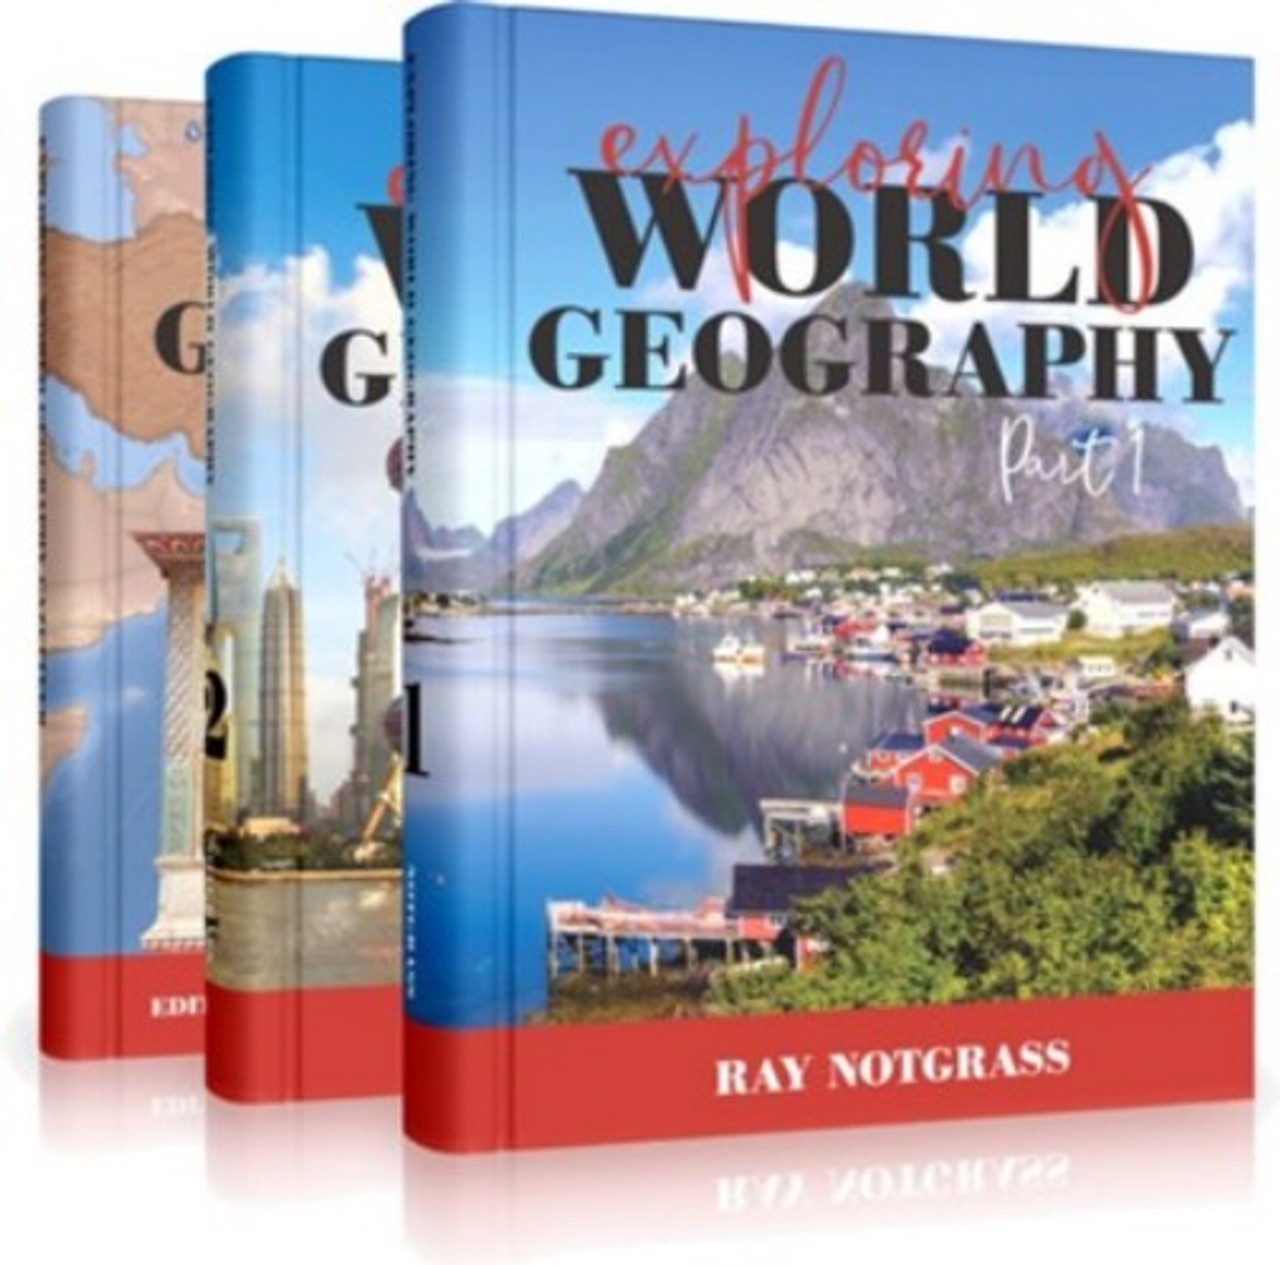 World　Geography　Notgrass　Exploring